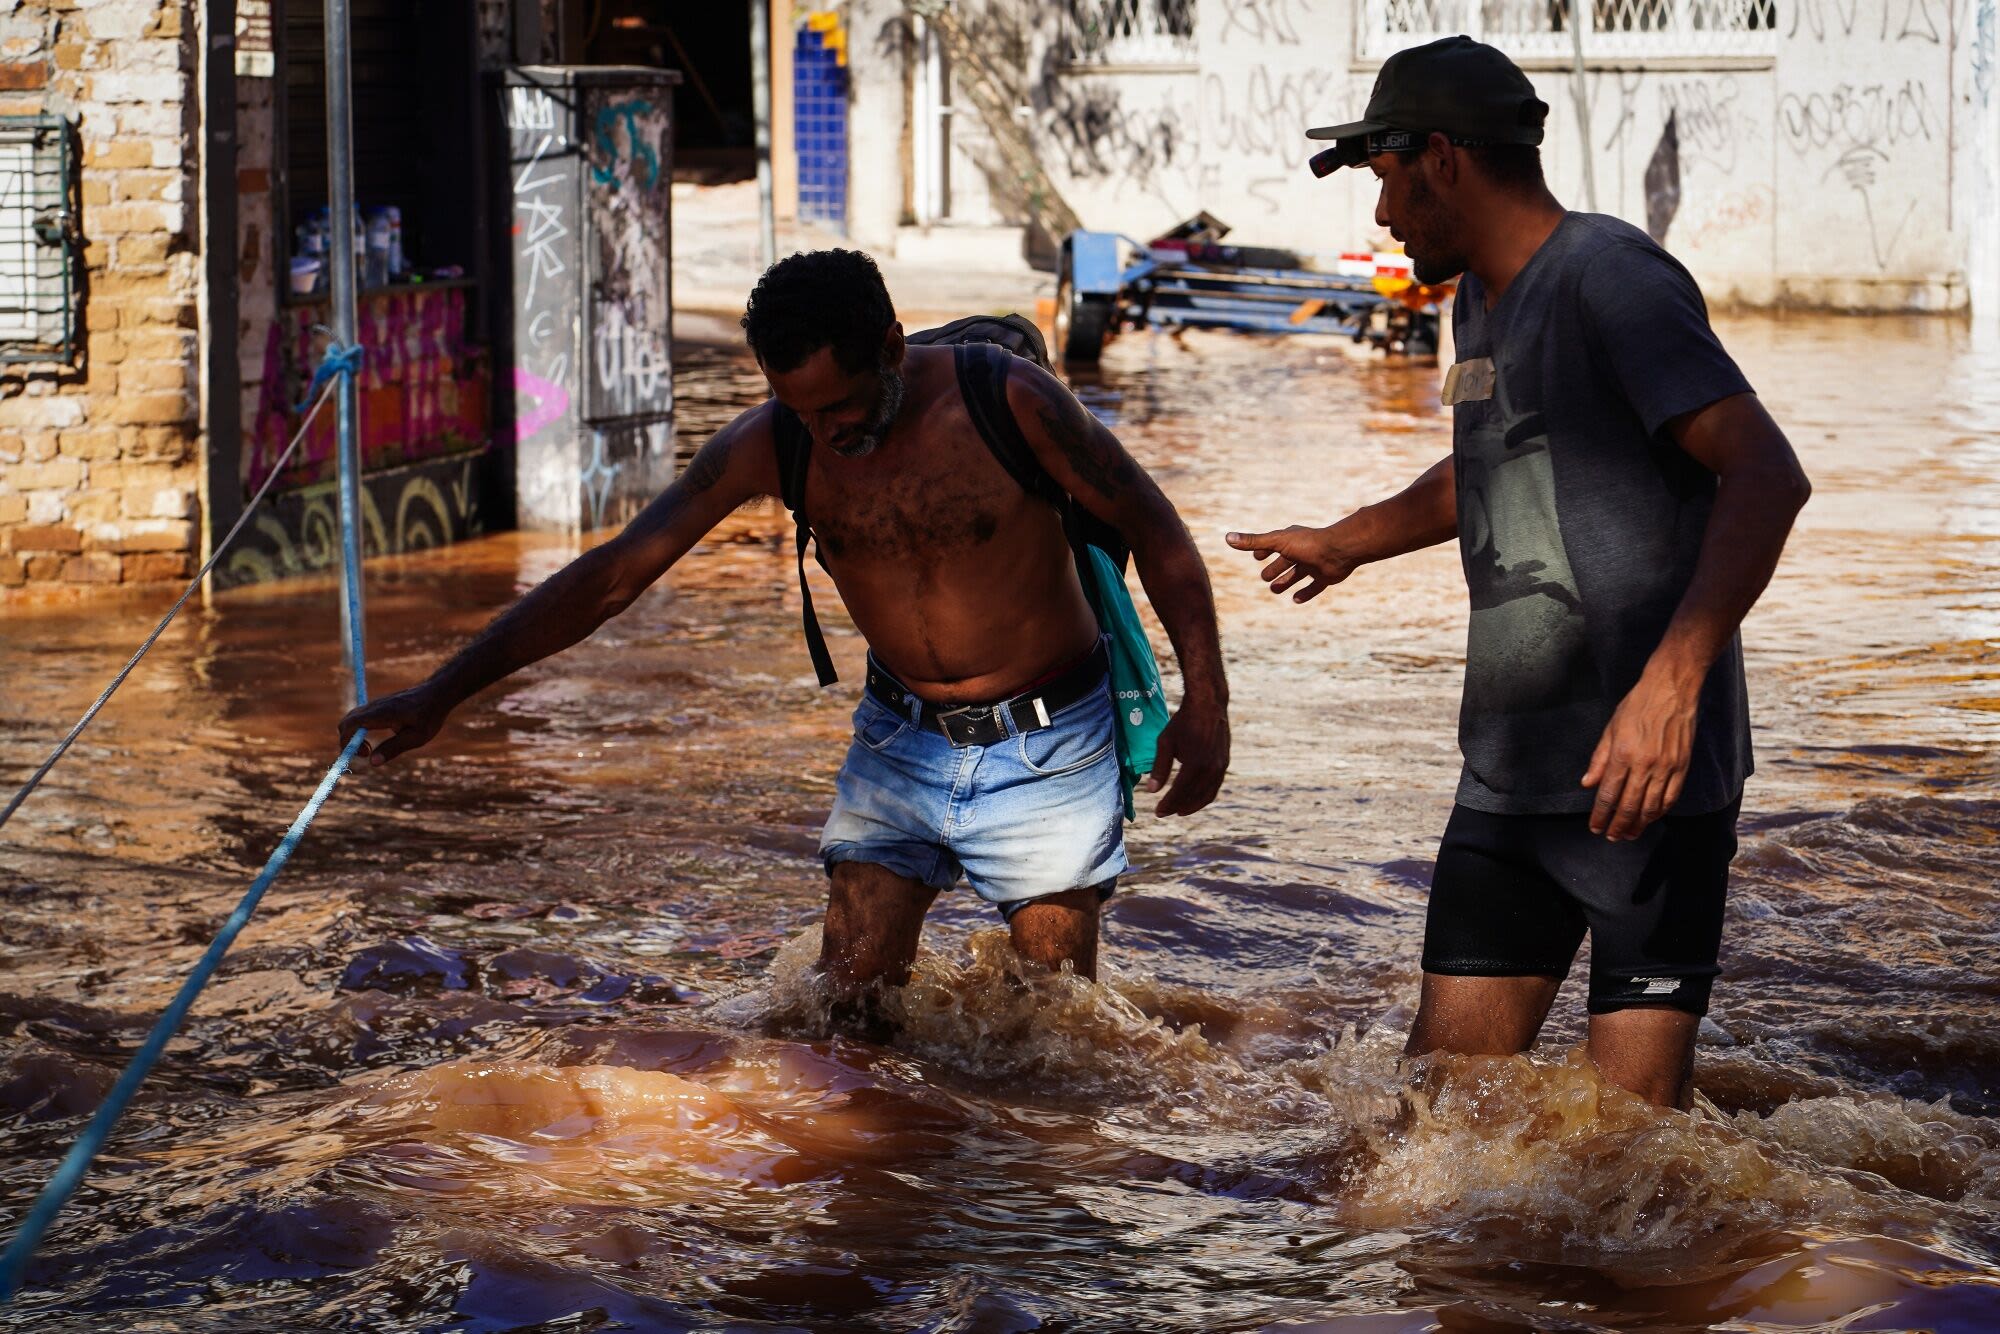 Brazil to Provide Aid to Thousands Left Homeless After Floods